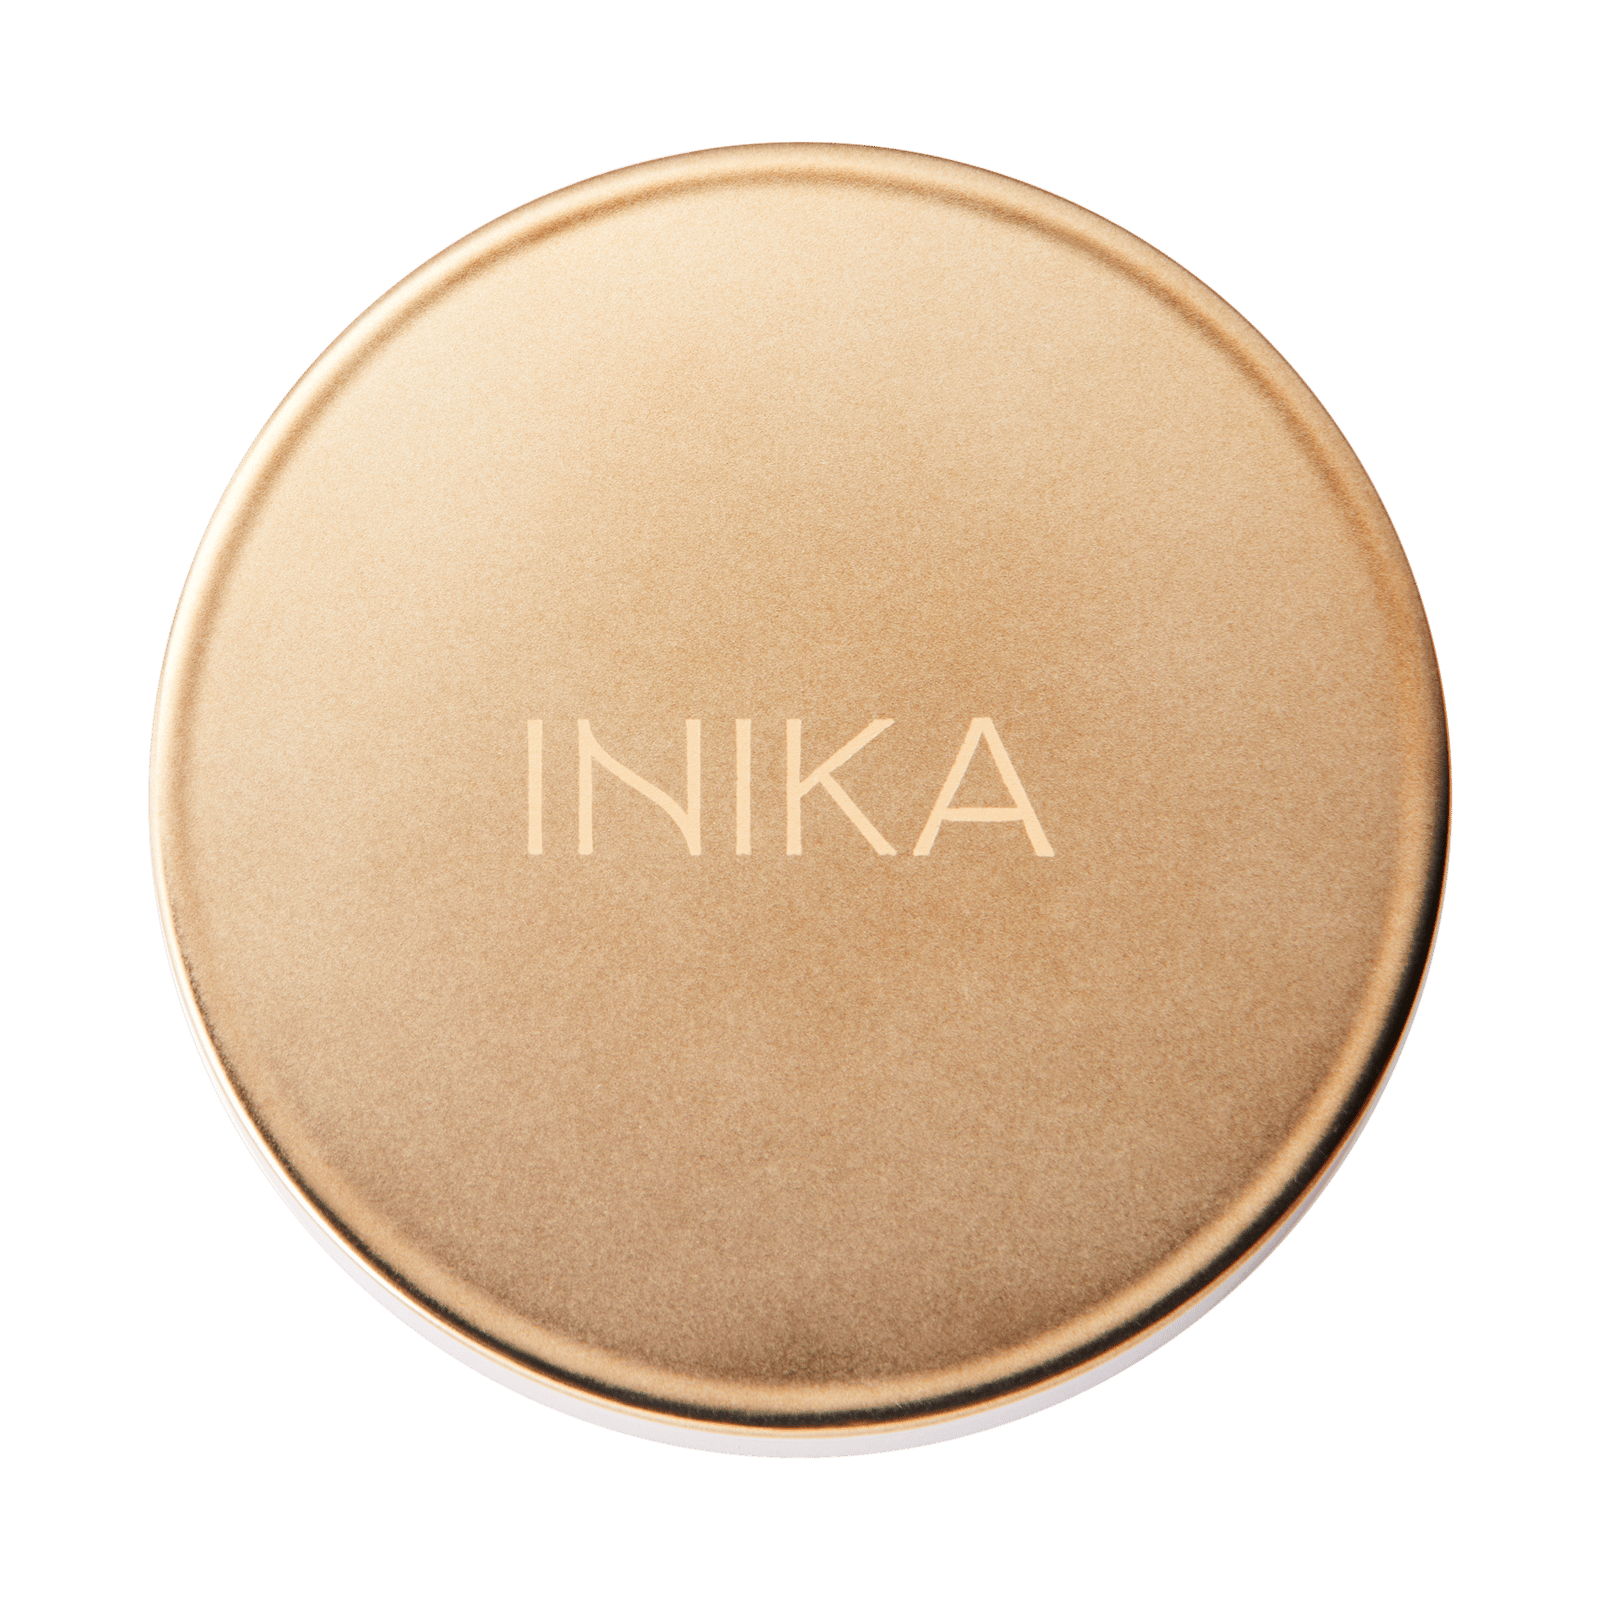 INIKA ORGANIC Baked Mineral Bronzer Sunkissed 8g